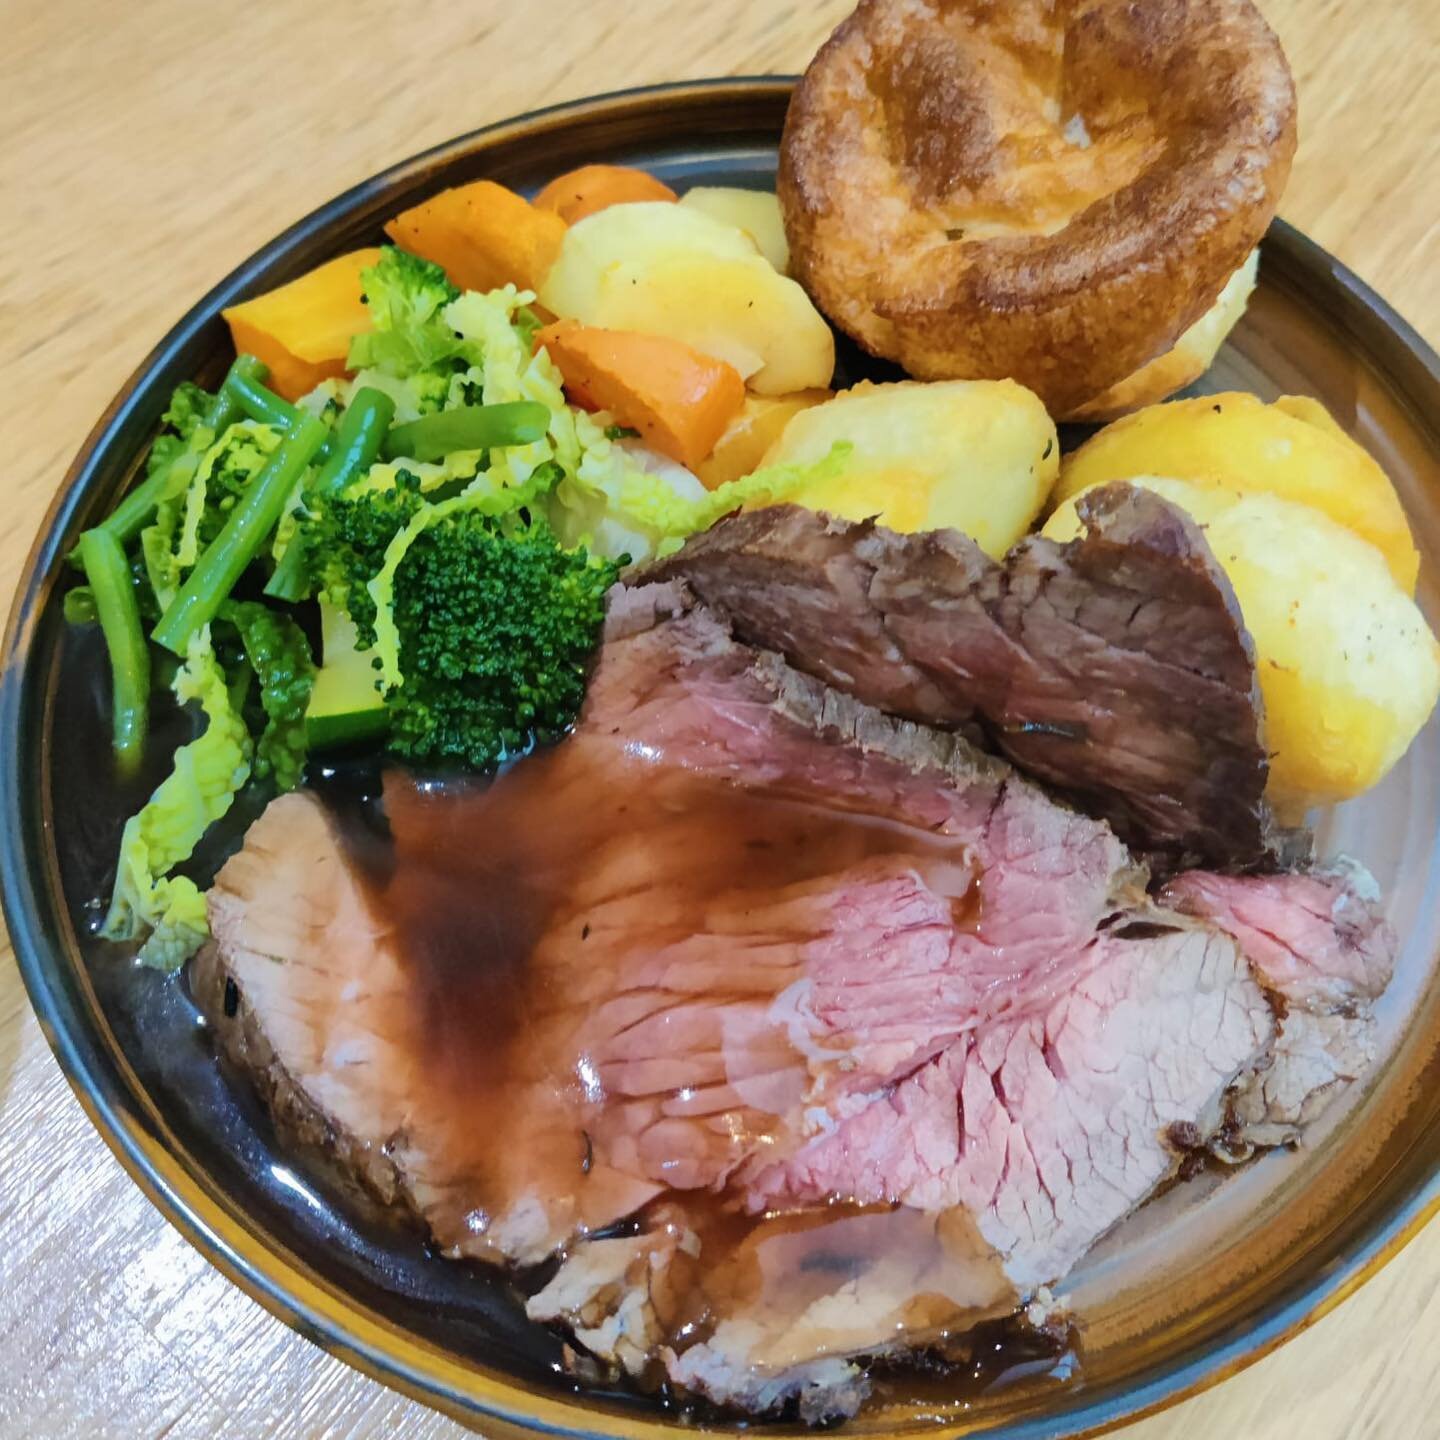 Due to a couple of cancellations we have some availability tomorrow lunchtime for our delicious Sunday roasts, our full festive menu is also available. 

Call us on 01234 823946 to book! 

#redlion #redlionstevington #stevington #bedford #bedfordshir